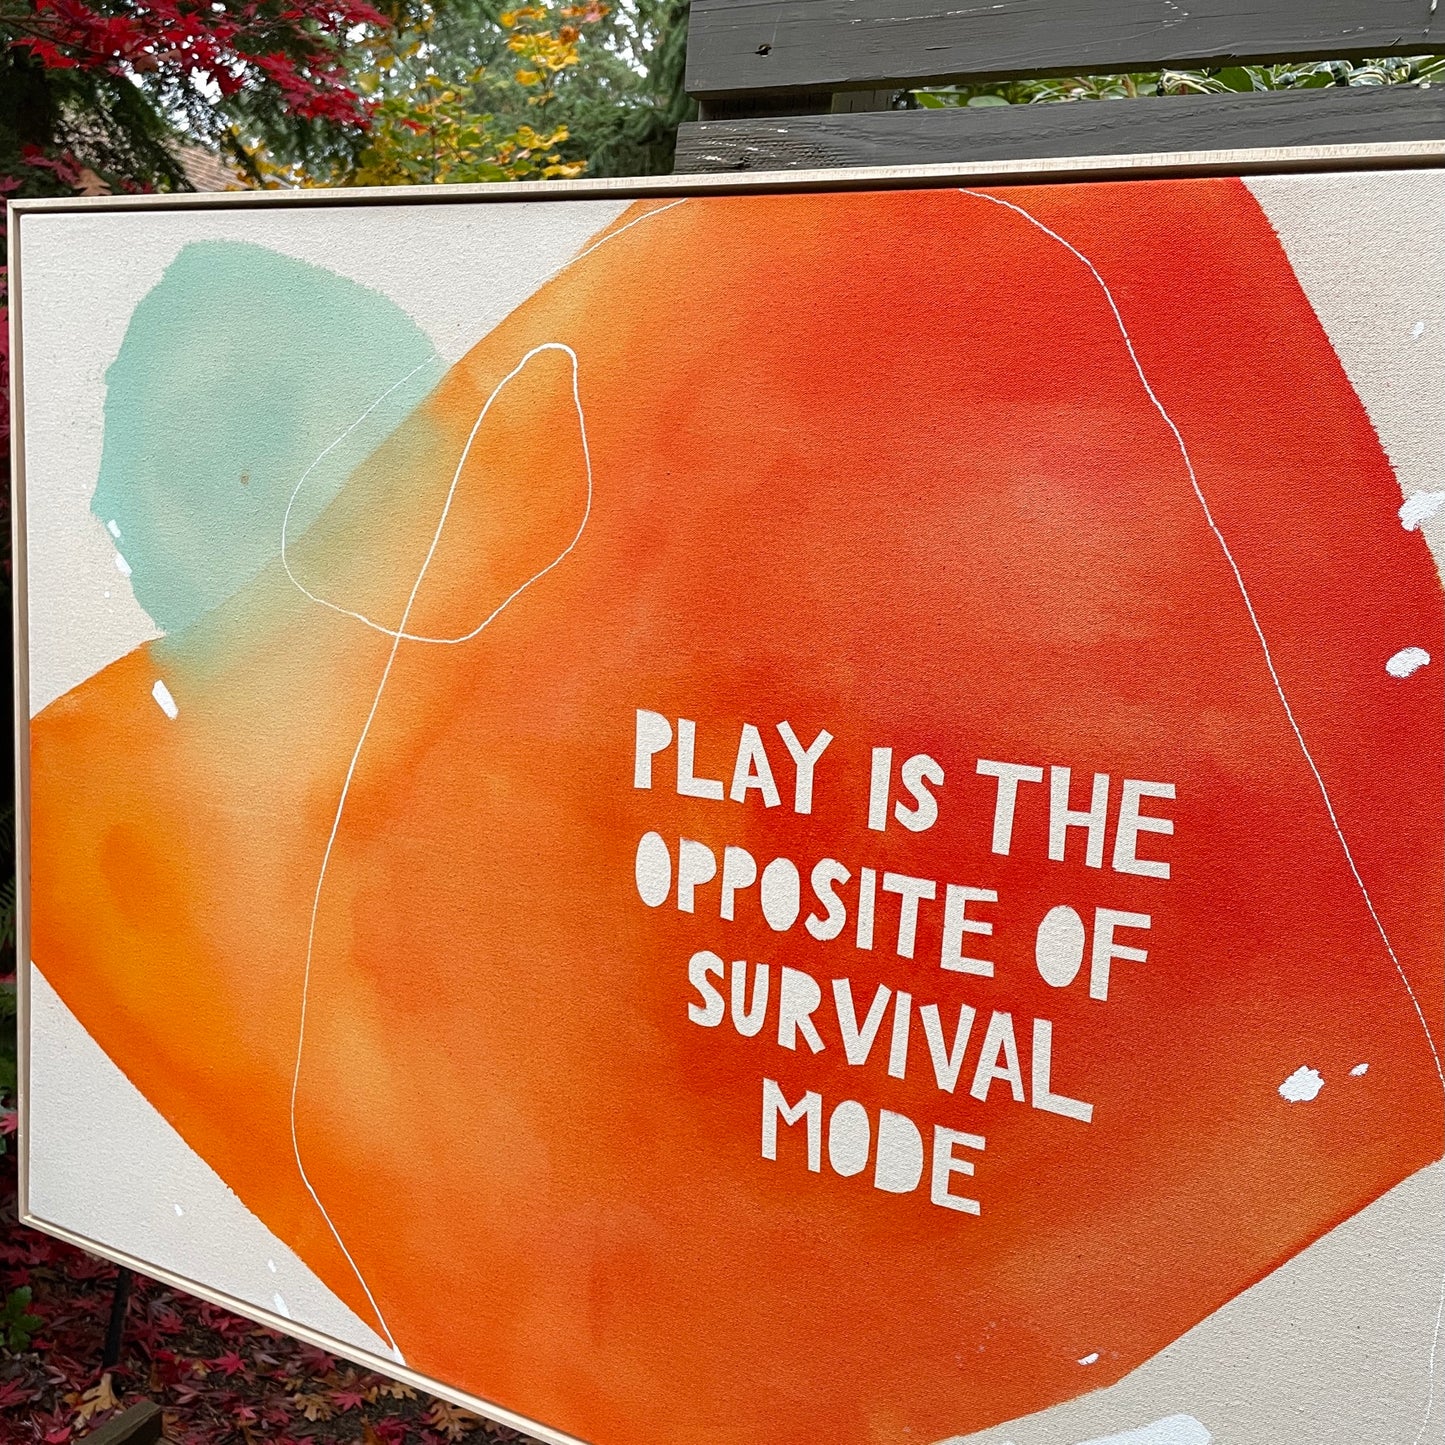 PLAY IS THE OPPOSITE OF SURVIVAL MODE